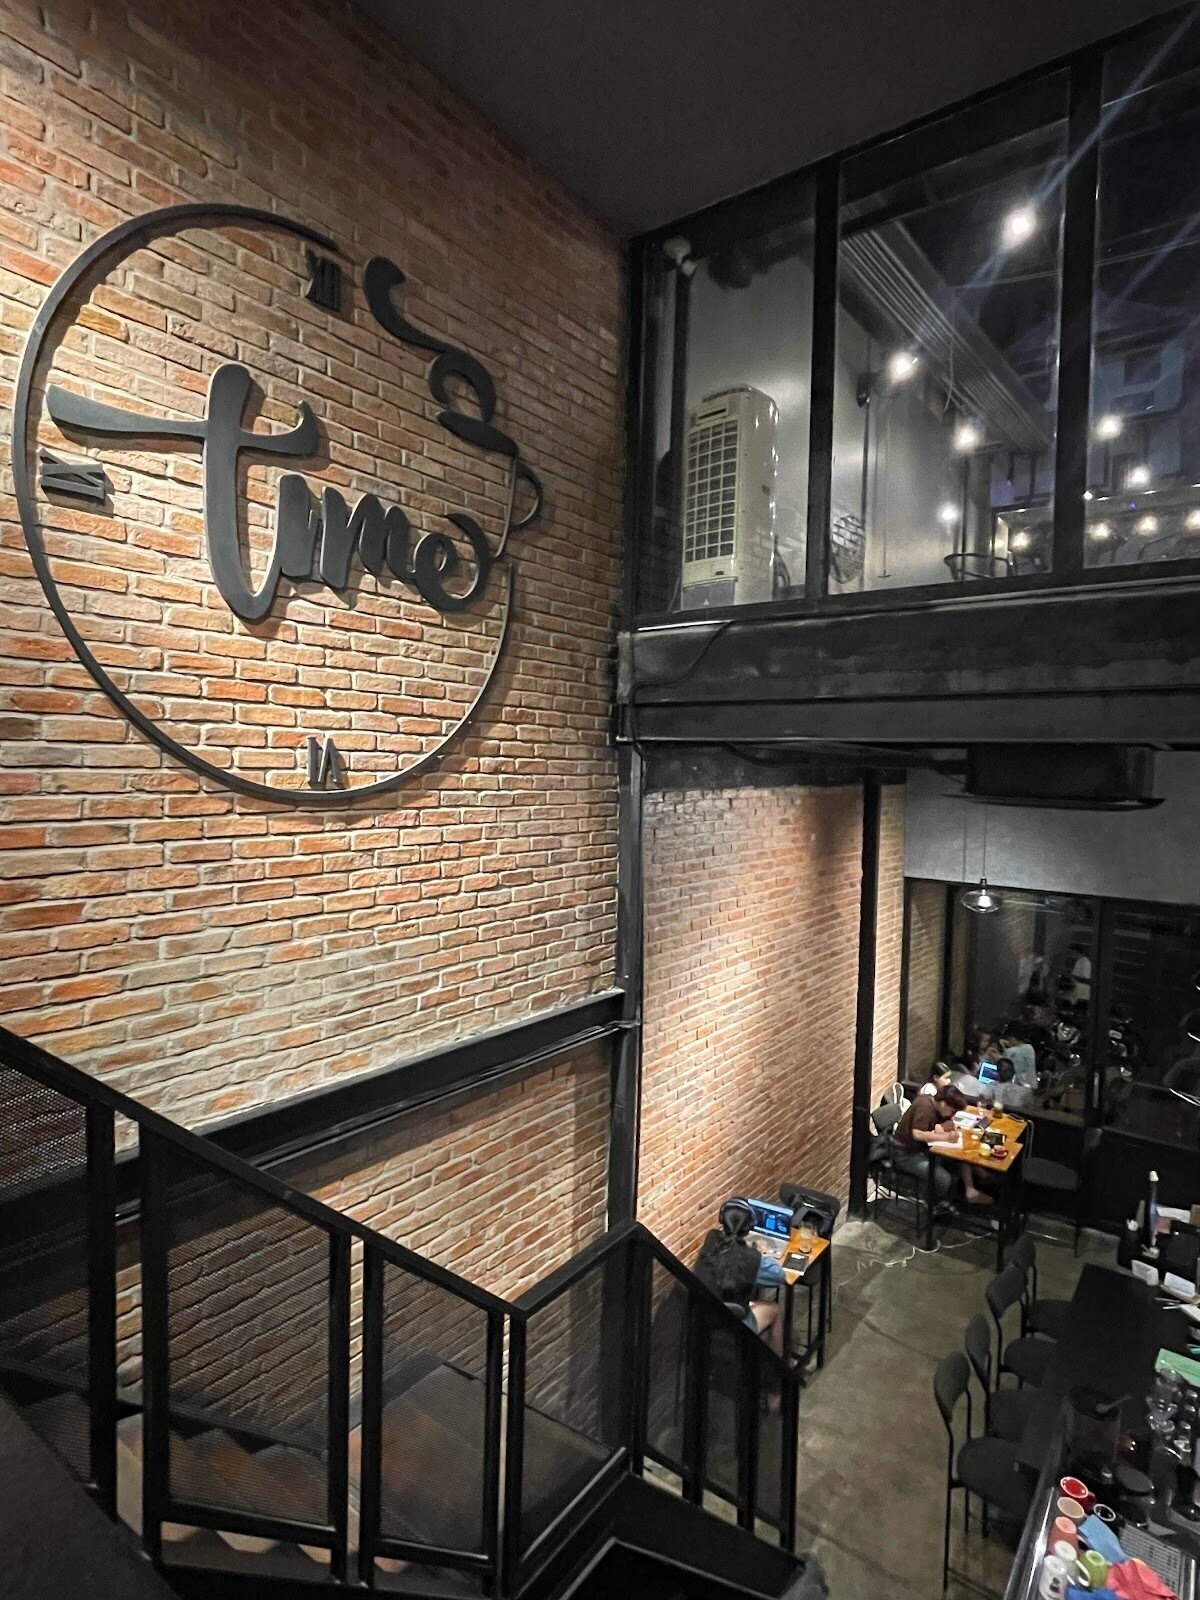 <span class="translation_missing" title="translation missing: en.meta.location_title, location_name: Time Cafe, city: Cần Thơ">Location Title</span>